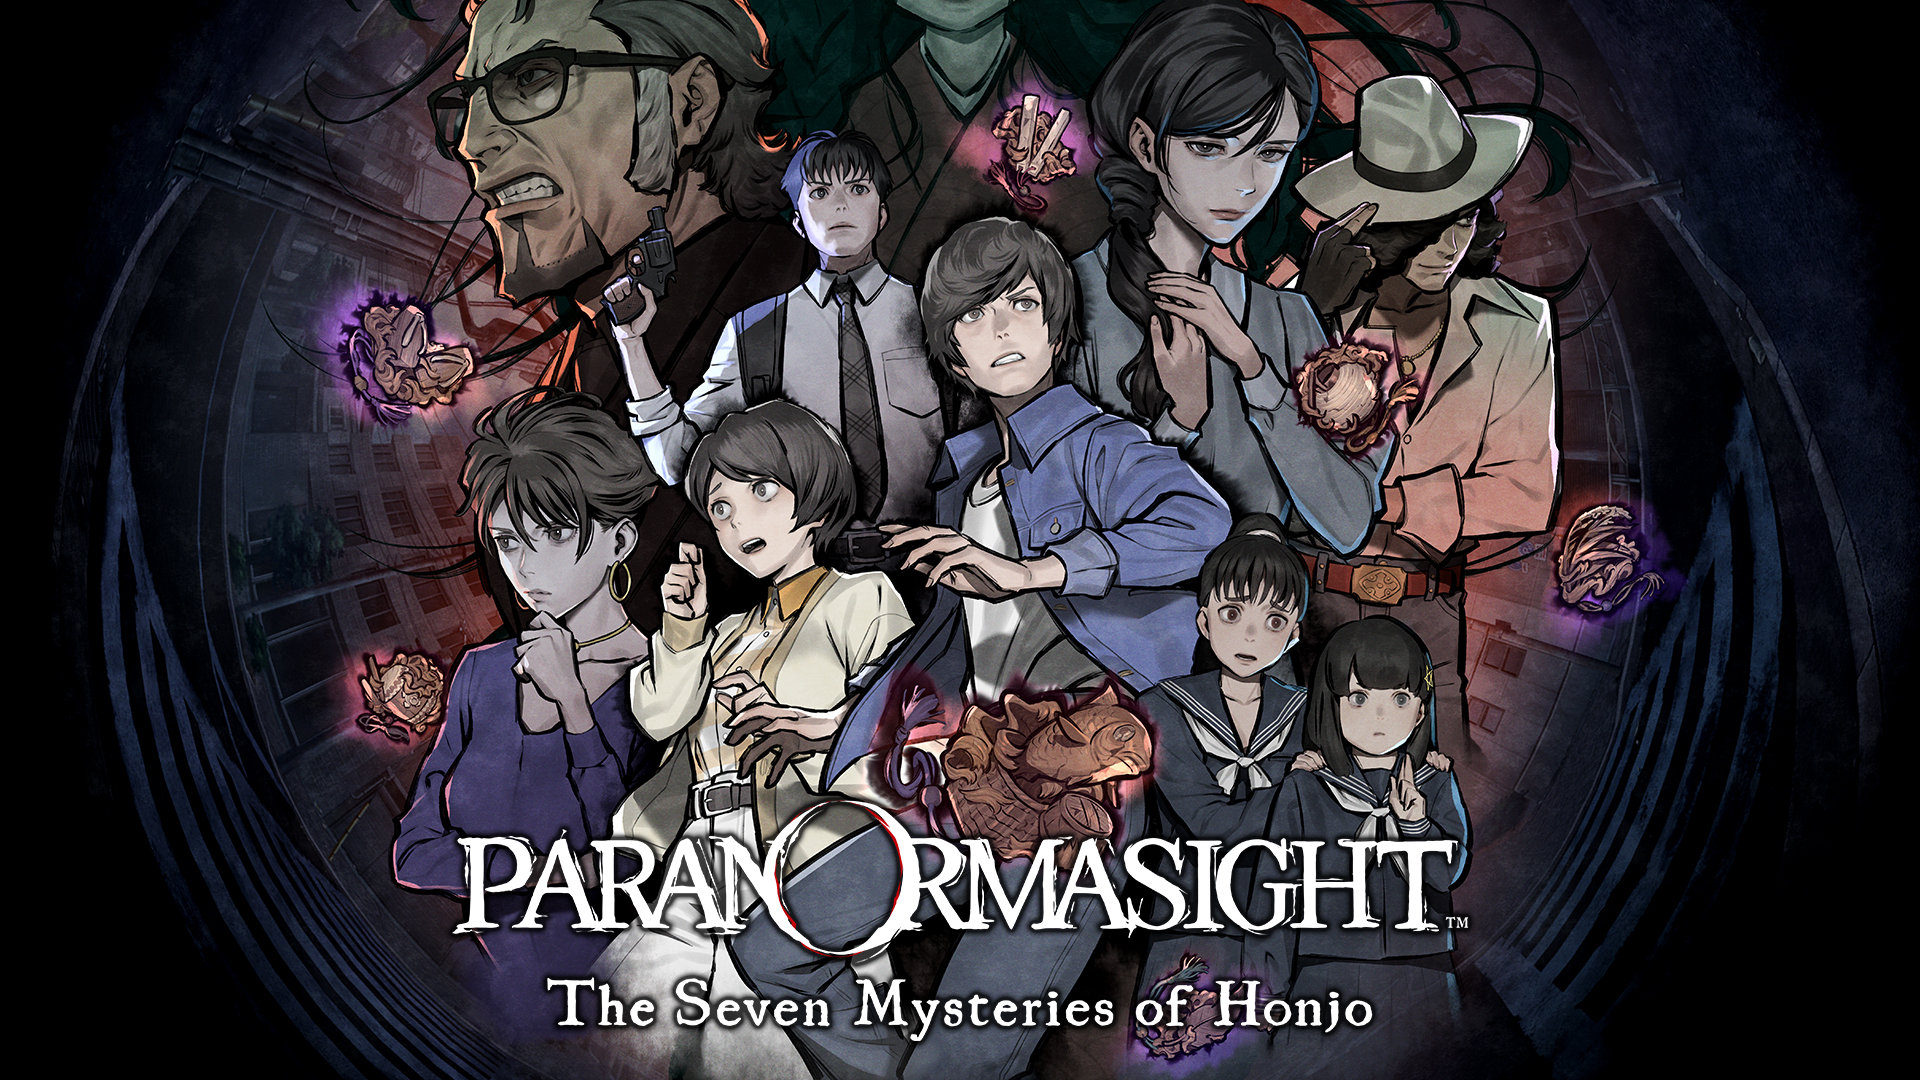 PARANORMASIGHT: The Seven Mysteries of Honjo is on sale now!